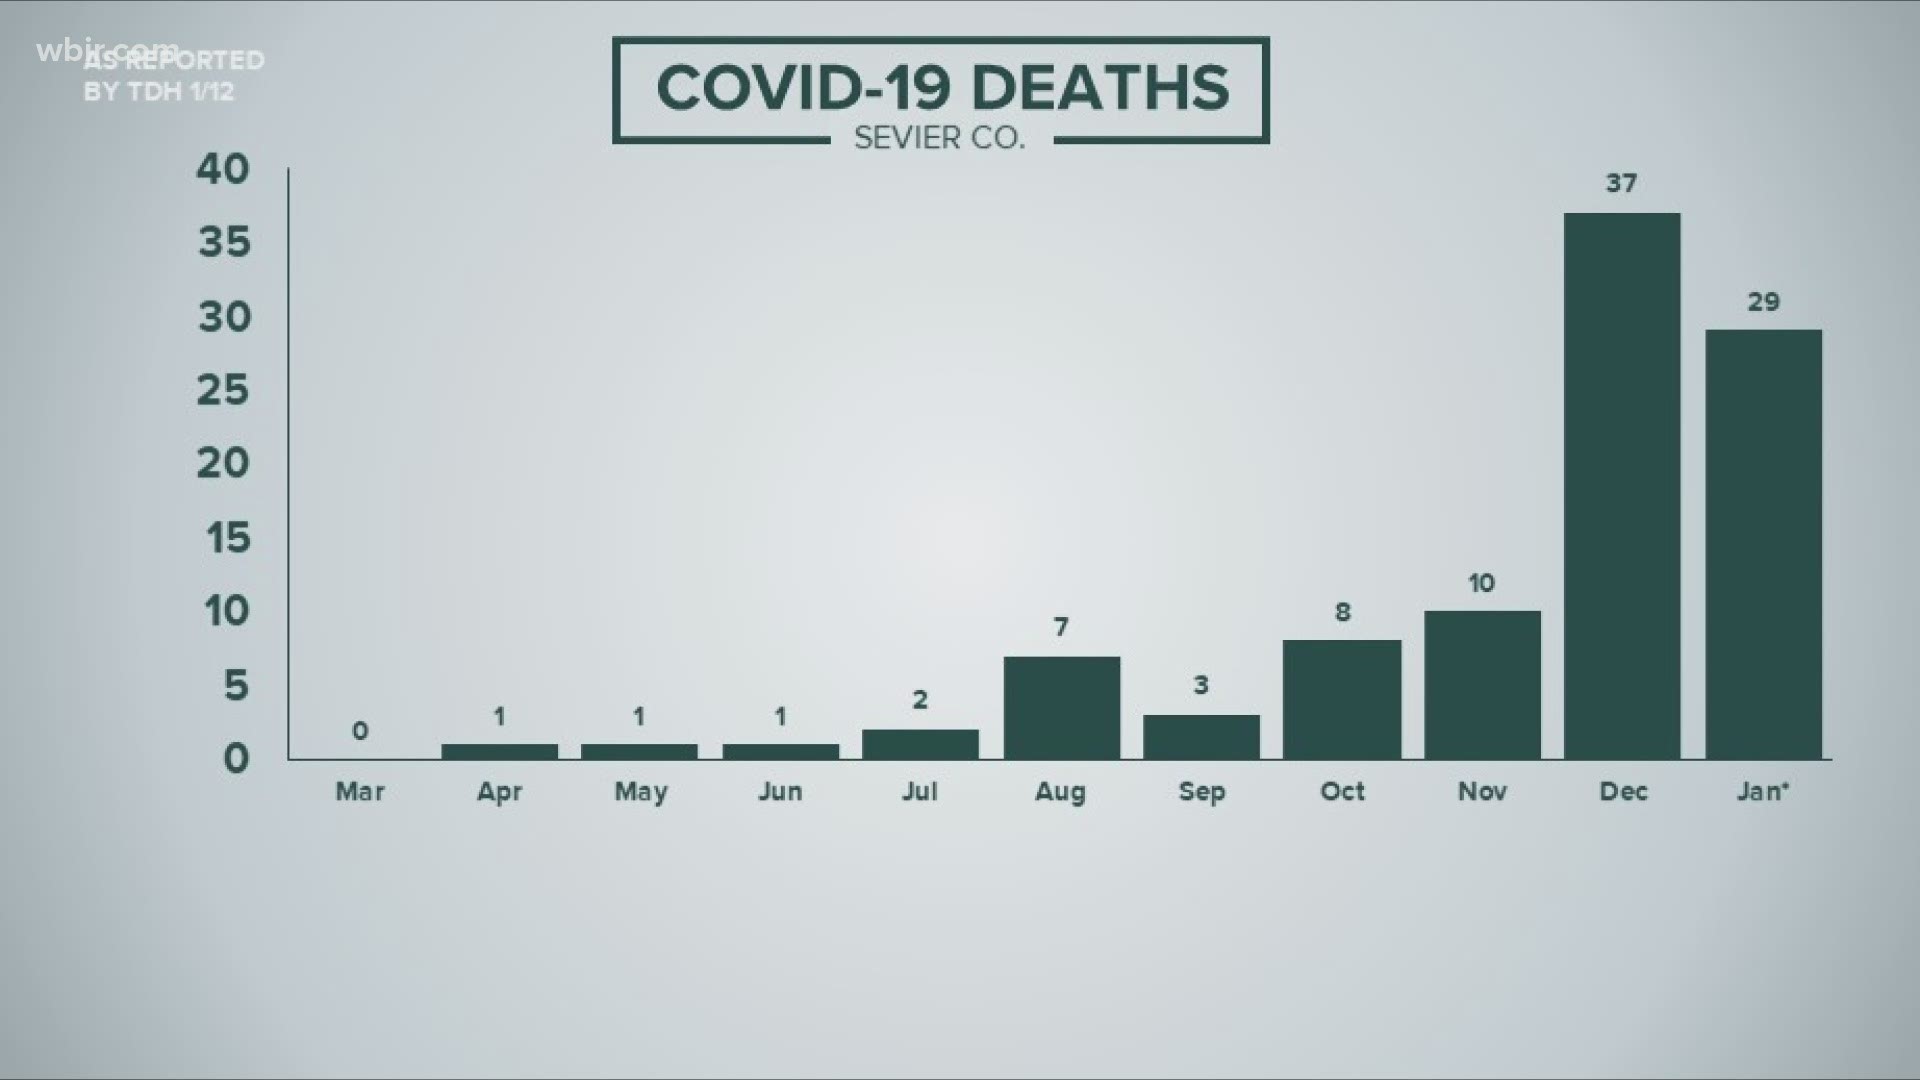 Deaths from COVID-19 continue to rise in Tennessee, but especially in the more rural counties surrounding Knox.